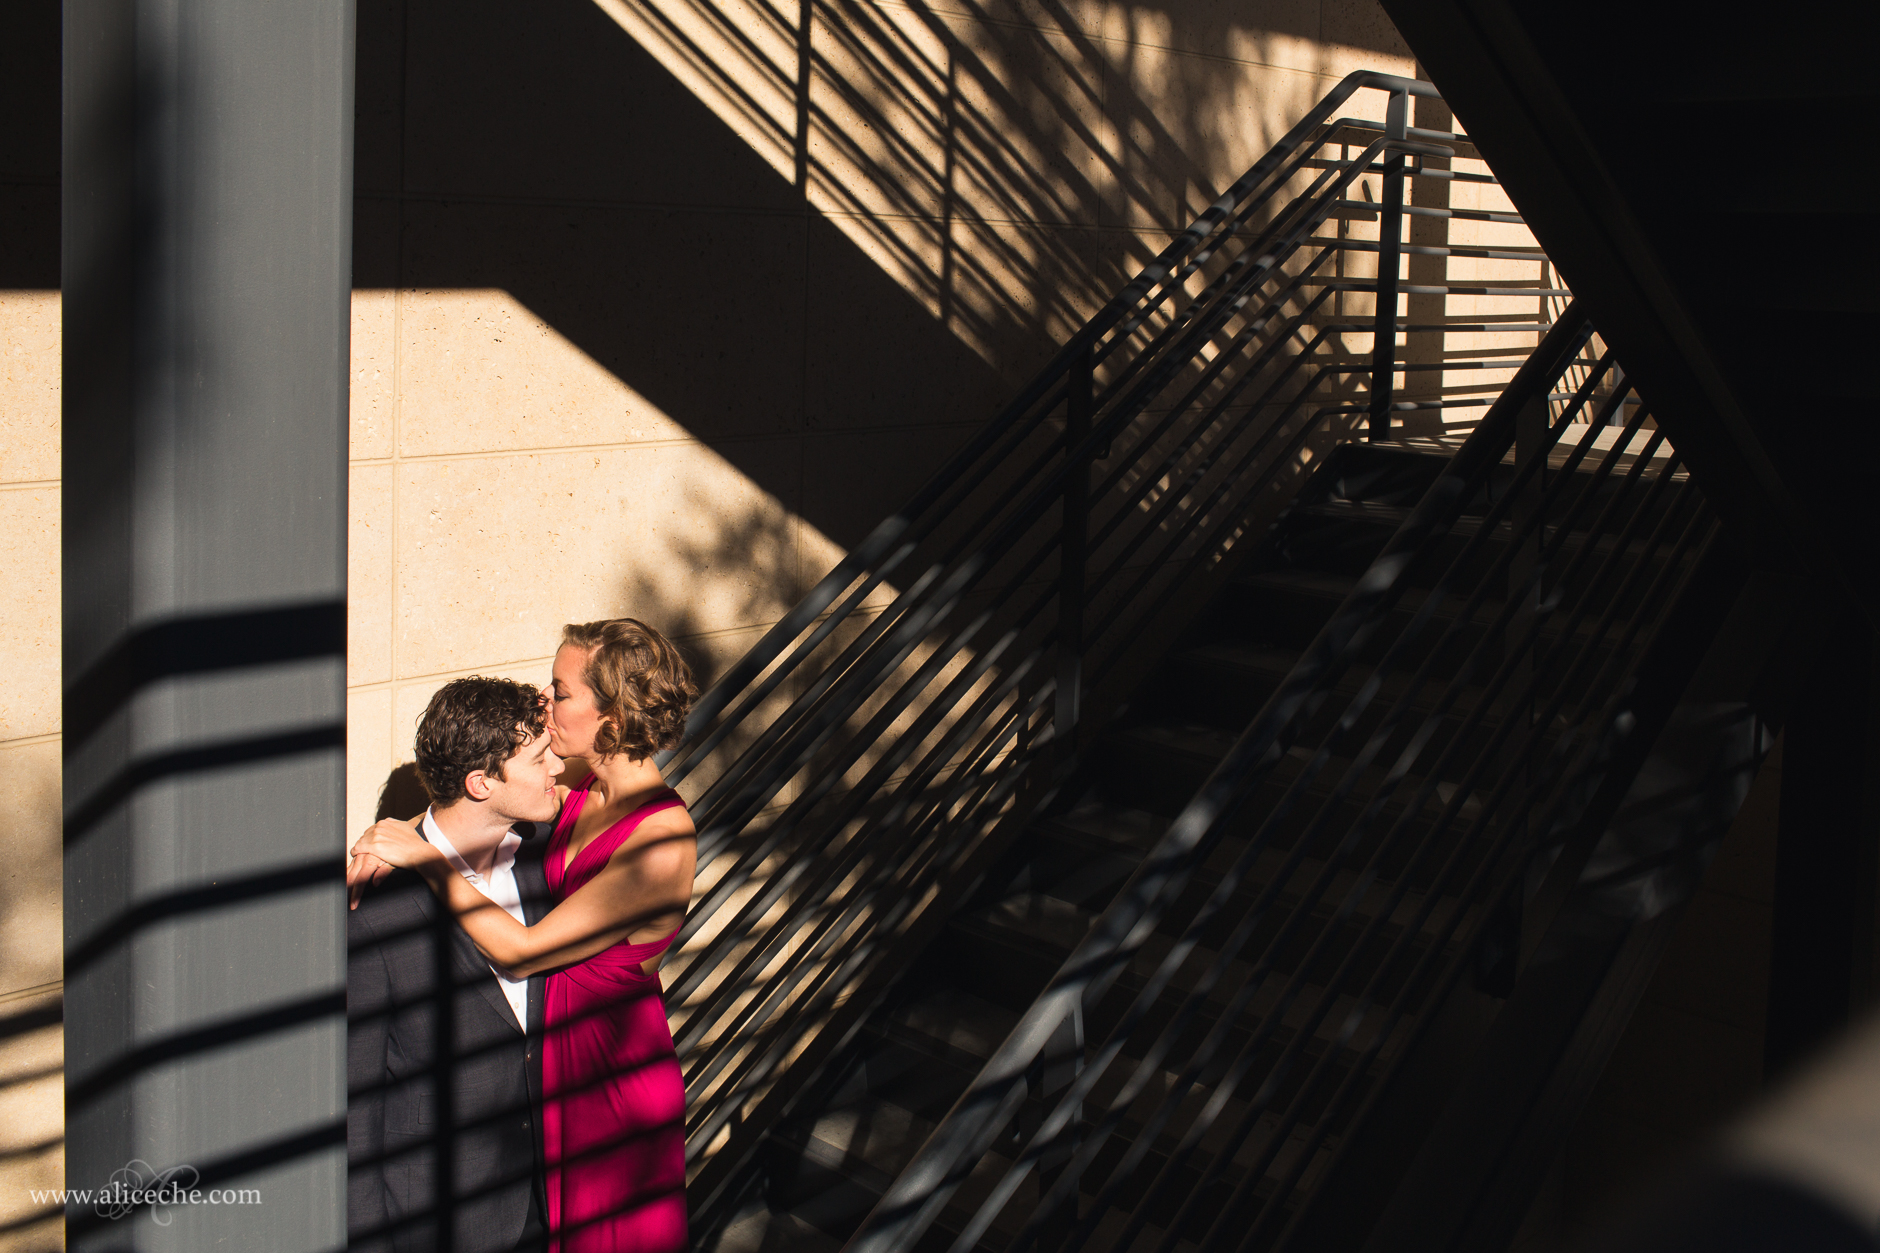 alice-che-photography-palo-alto-anniversary-session-couple-on-stairs-with-shadows